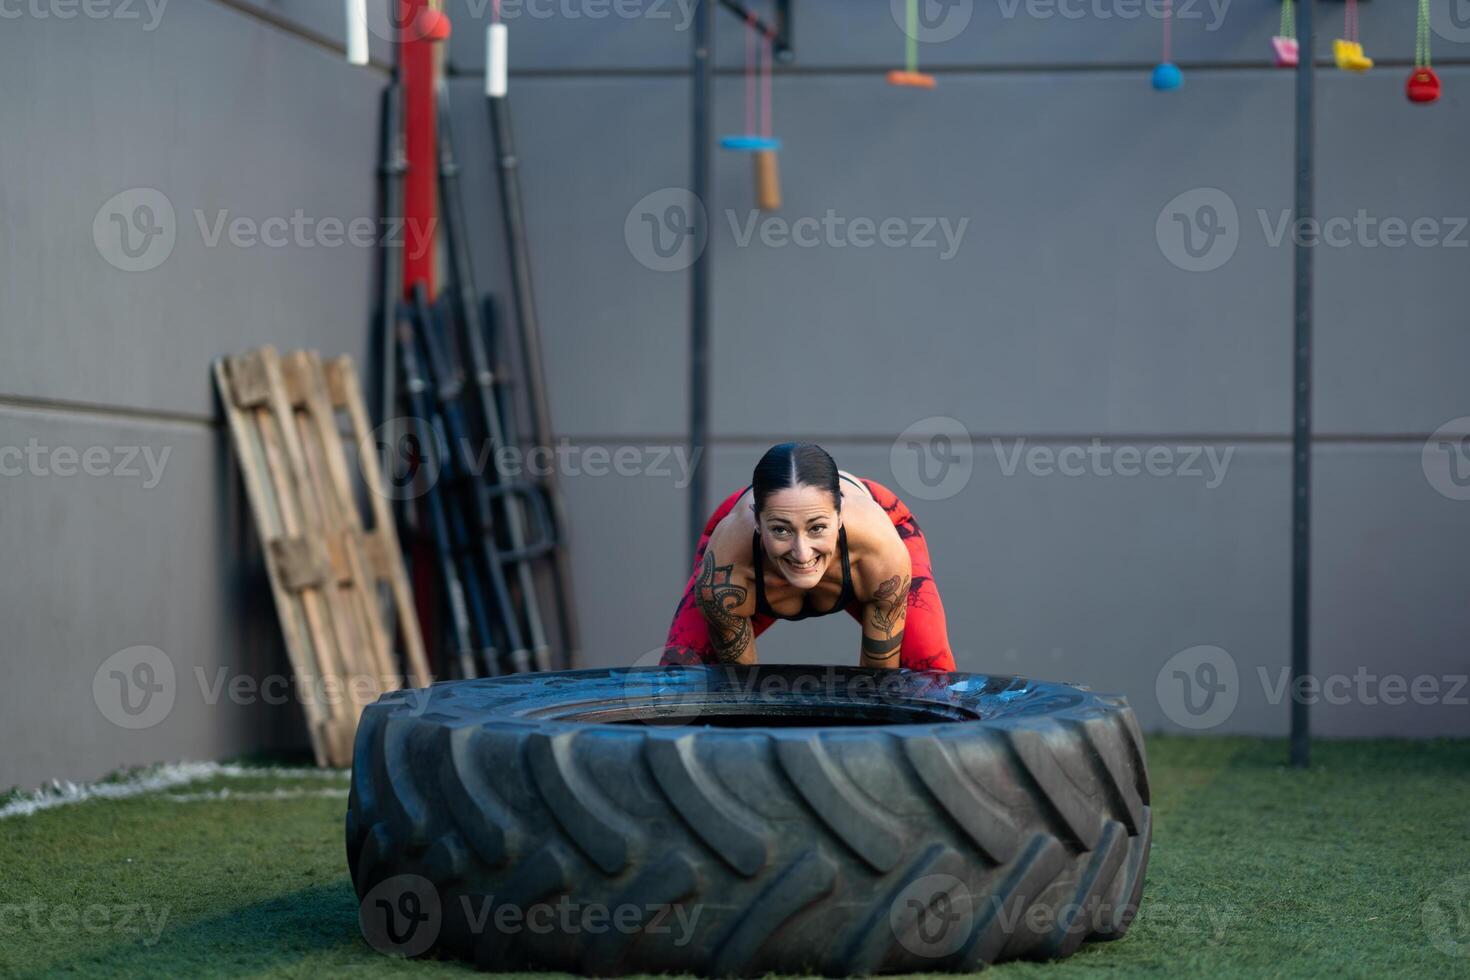 Sportive woman flipping a huge wheel in the gym photo